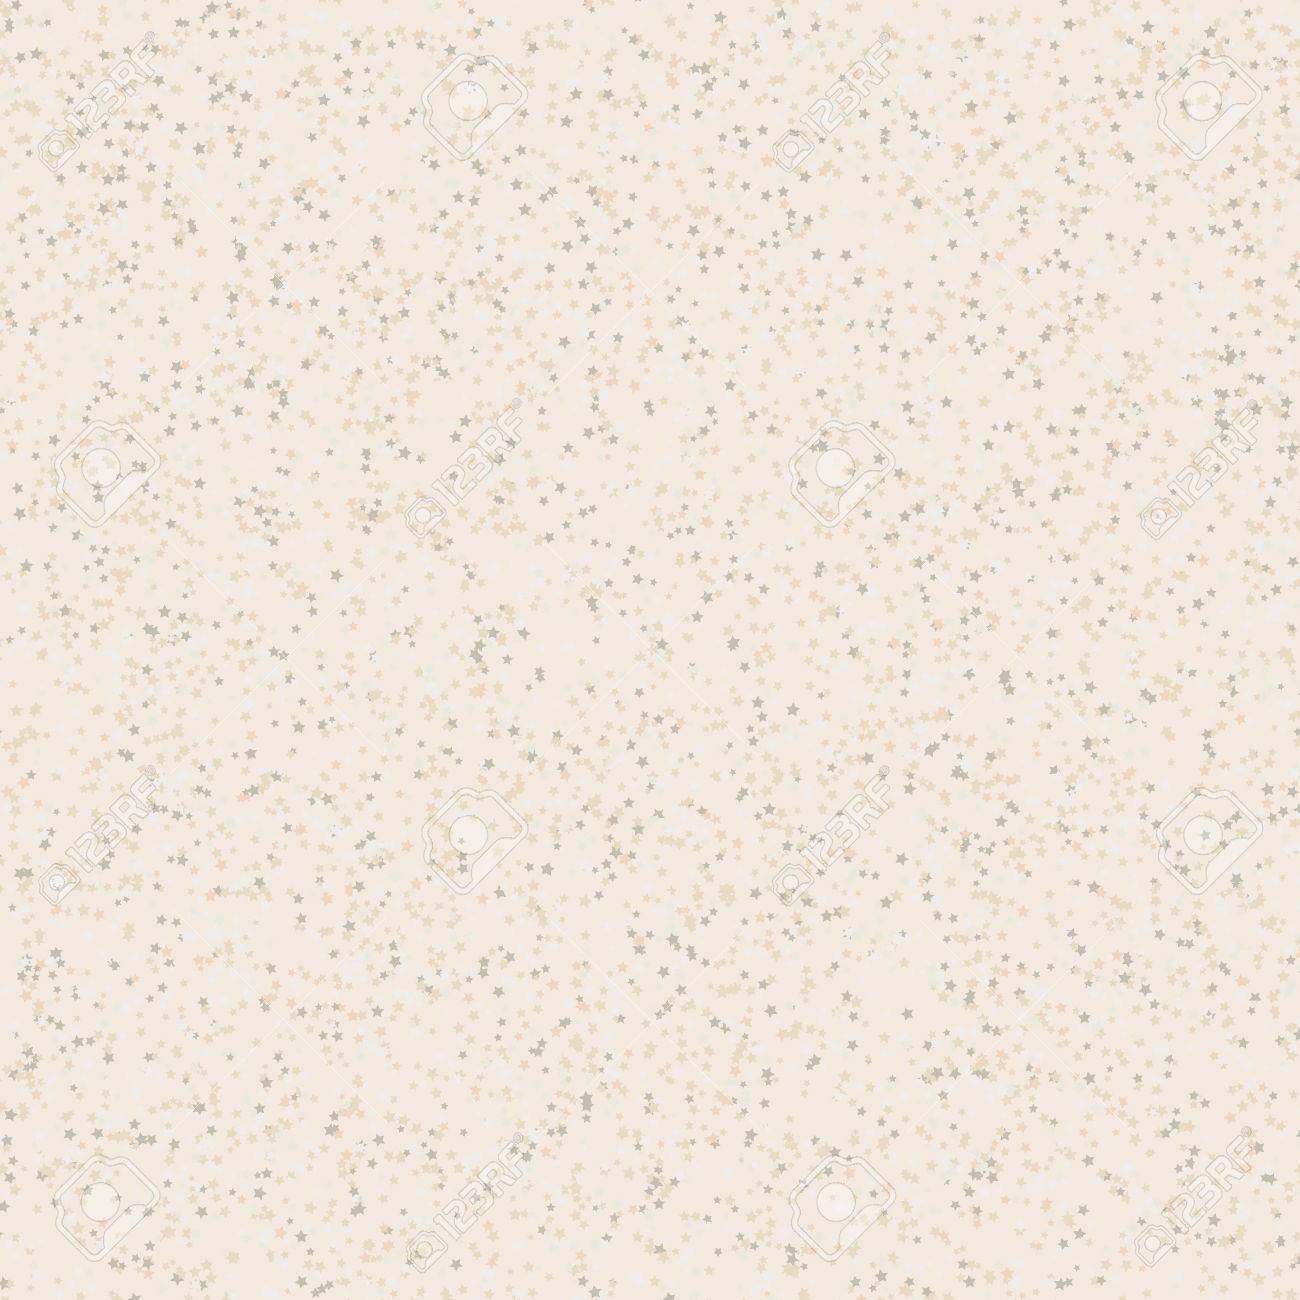 Star Background Card Scattered Tiny Stars With Texture Vector